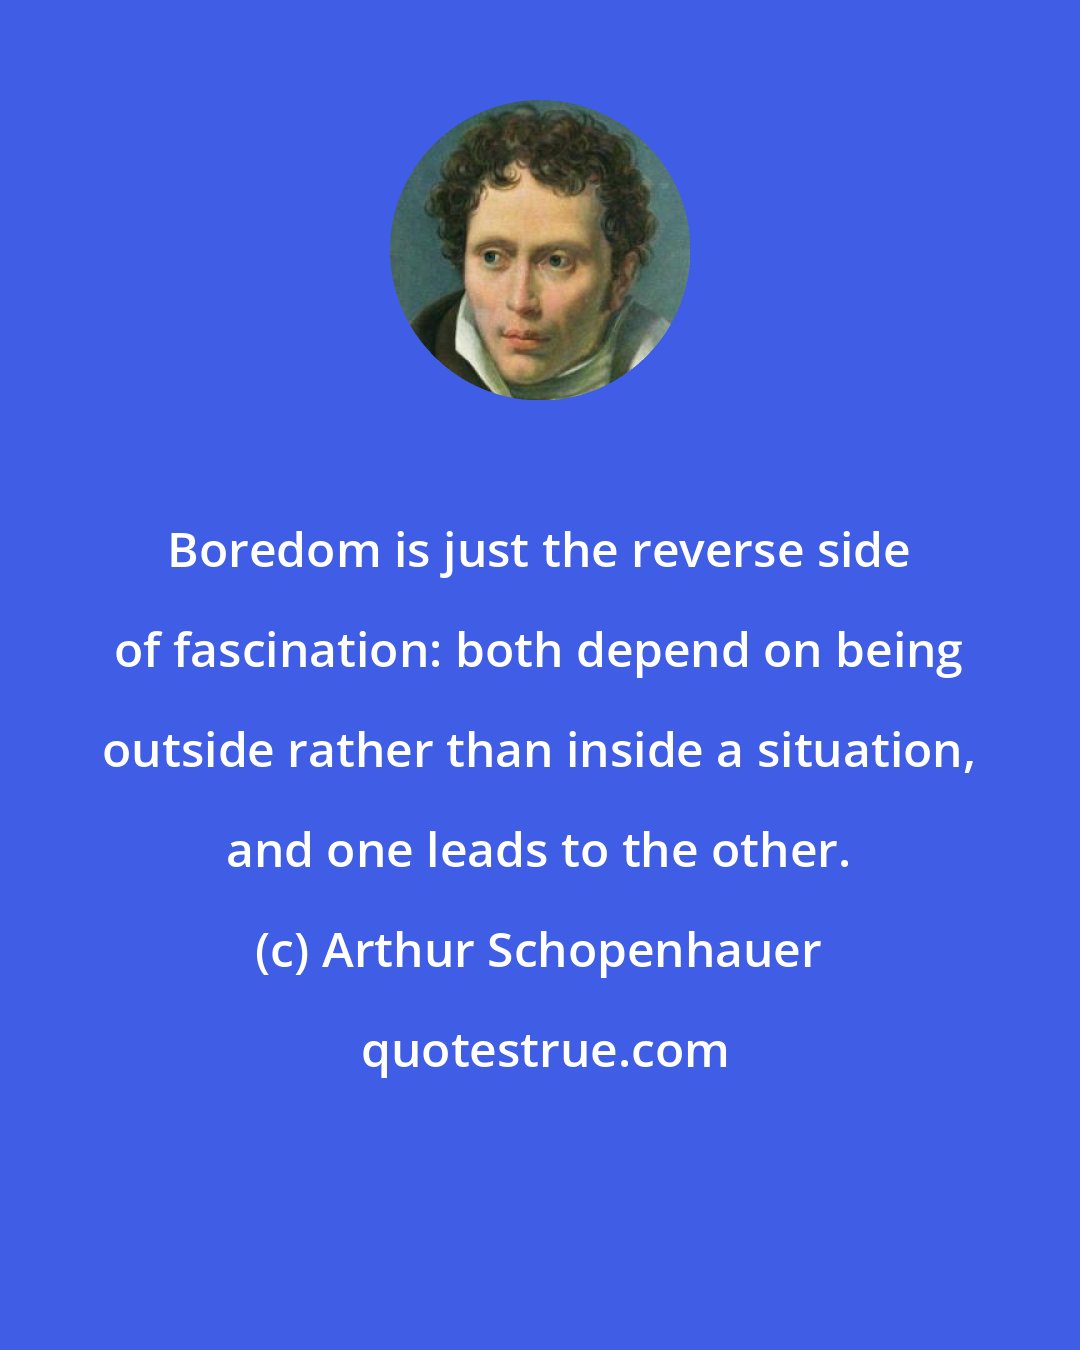 Arthur Schopenhauer: Boredom is just the reverse side of fascination: both depend on being outside rather than inside a situation, and one leads to the other.